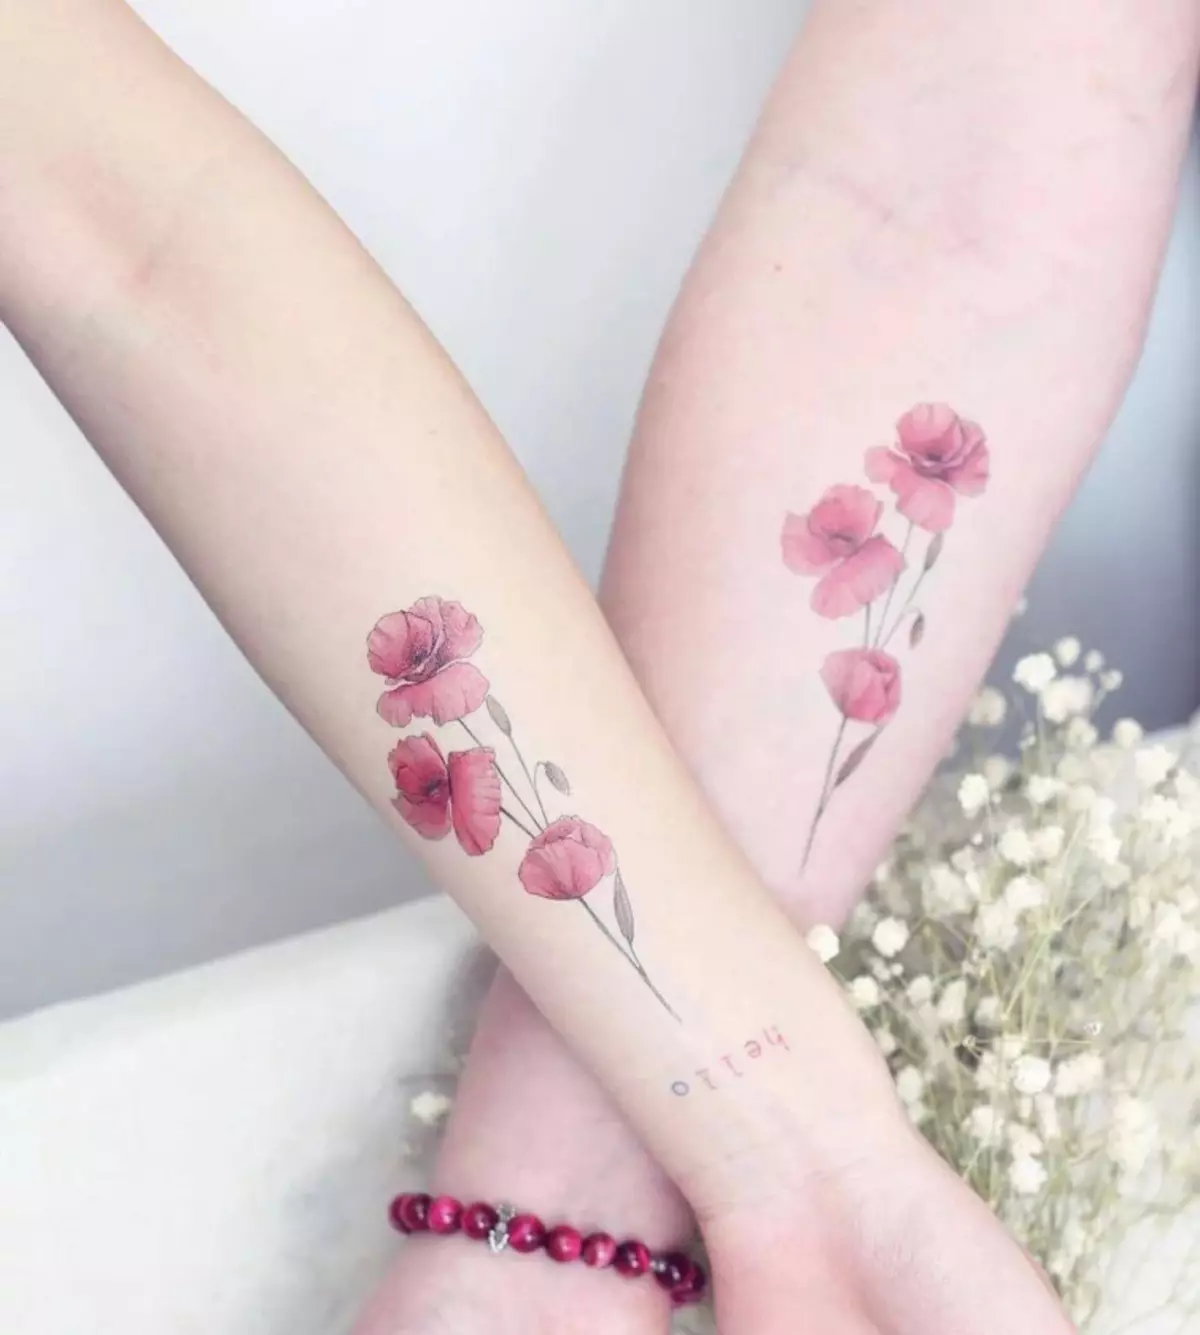 Tender tattoo: sketches for girls. Tattoos on hand and on shoulders, small and large. Gentle flowers and other feminine and sophisticated tattoos 282_8